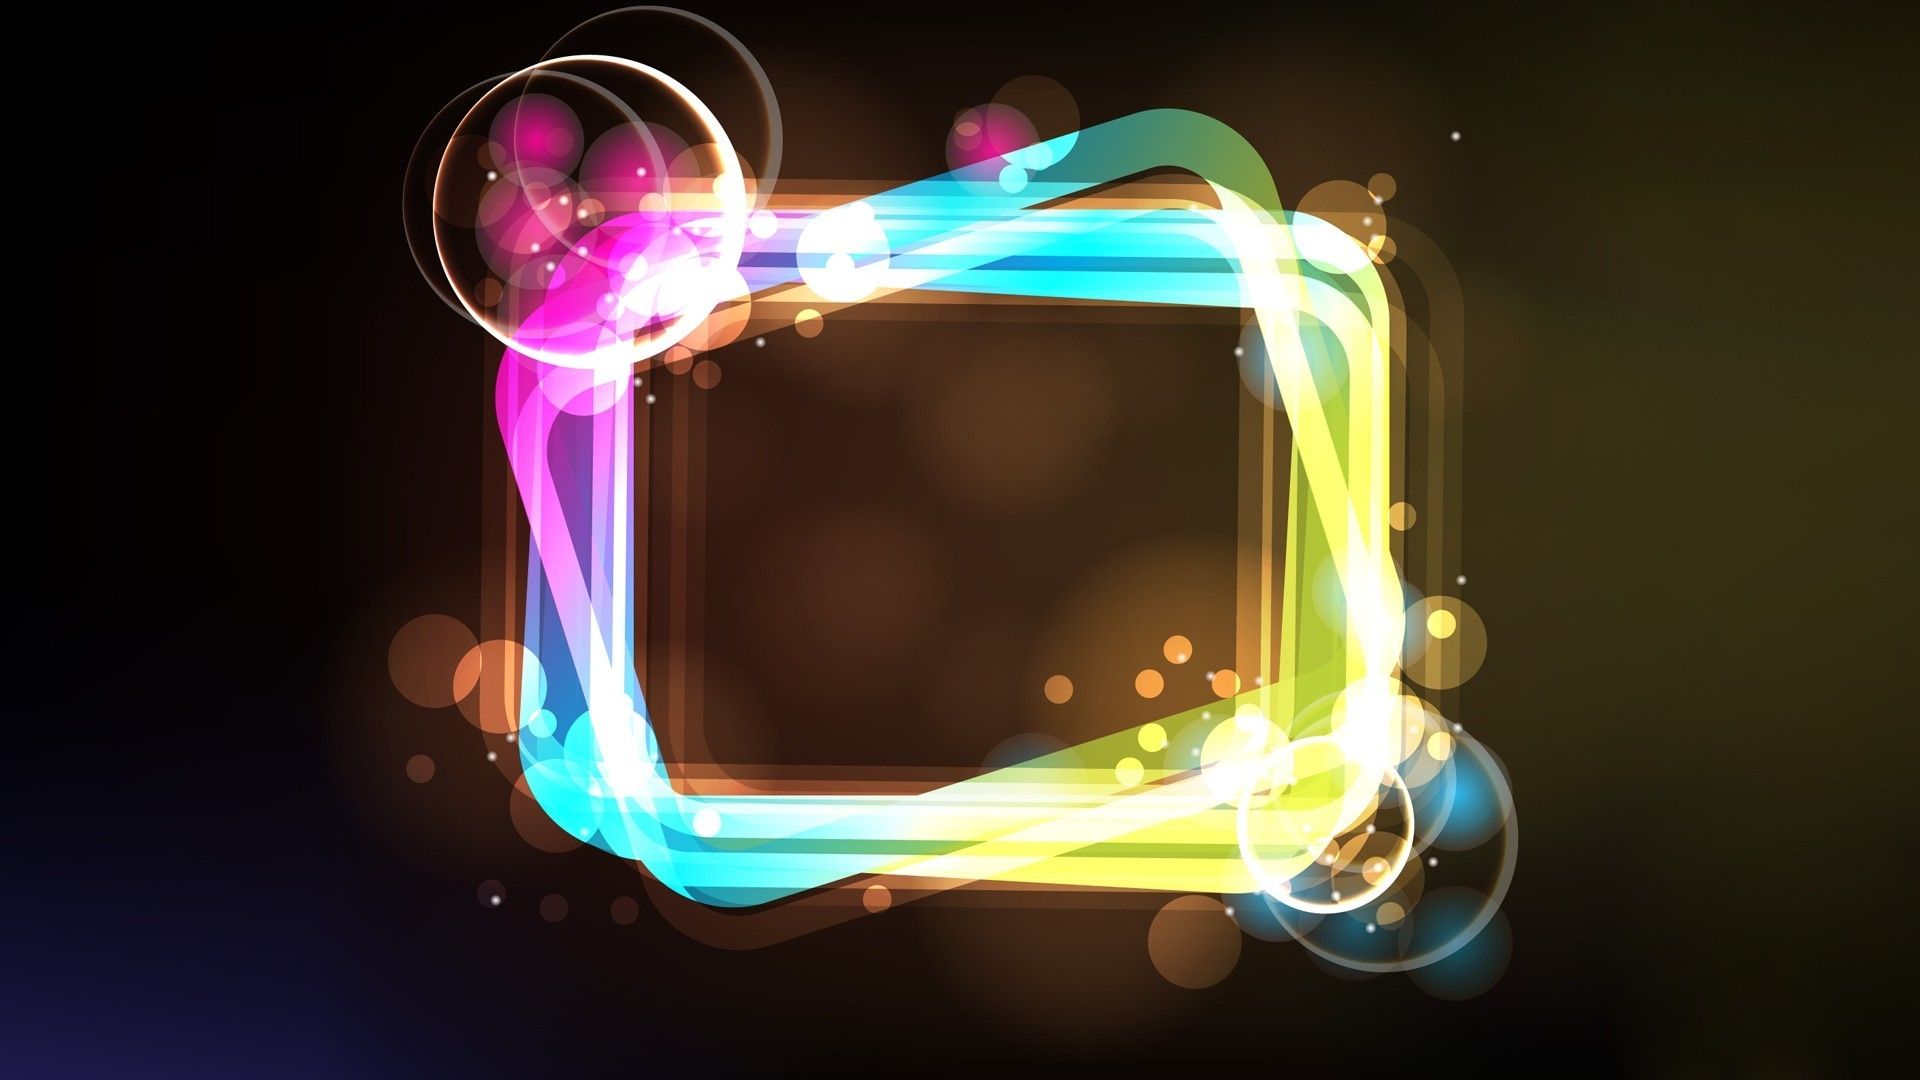 Wallpaper, neon, square, rectangle, light, color, glow, lighting, paint, multicolored, computer wallpaper 1920x1080